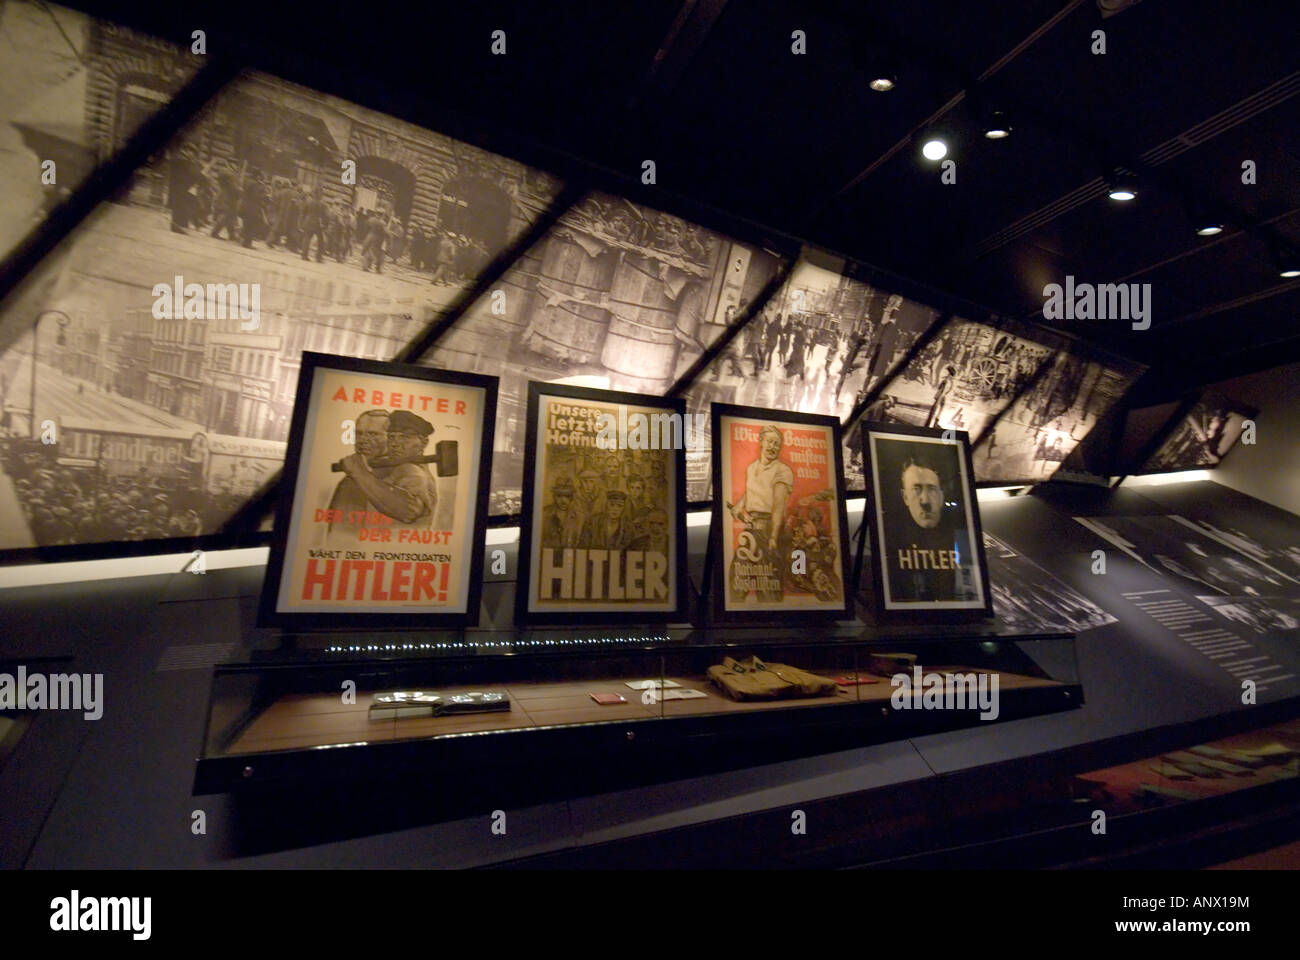 hitler electoral campaign in the imperial war museum london Stock Photo